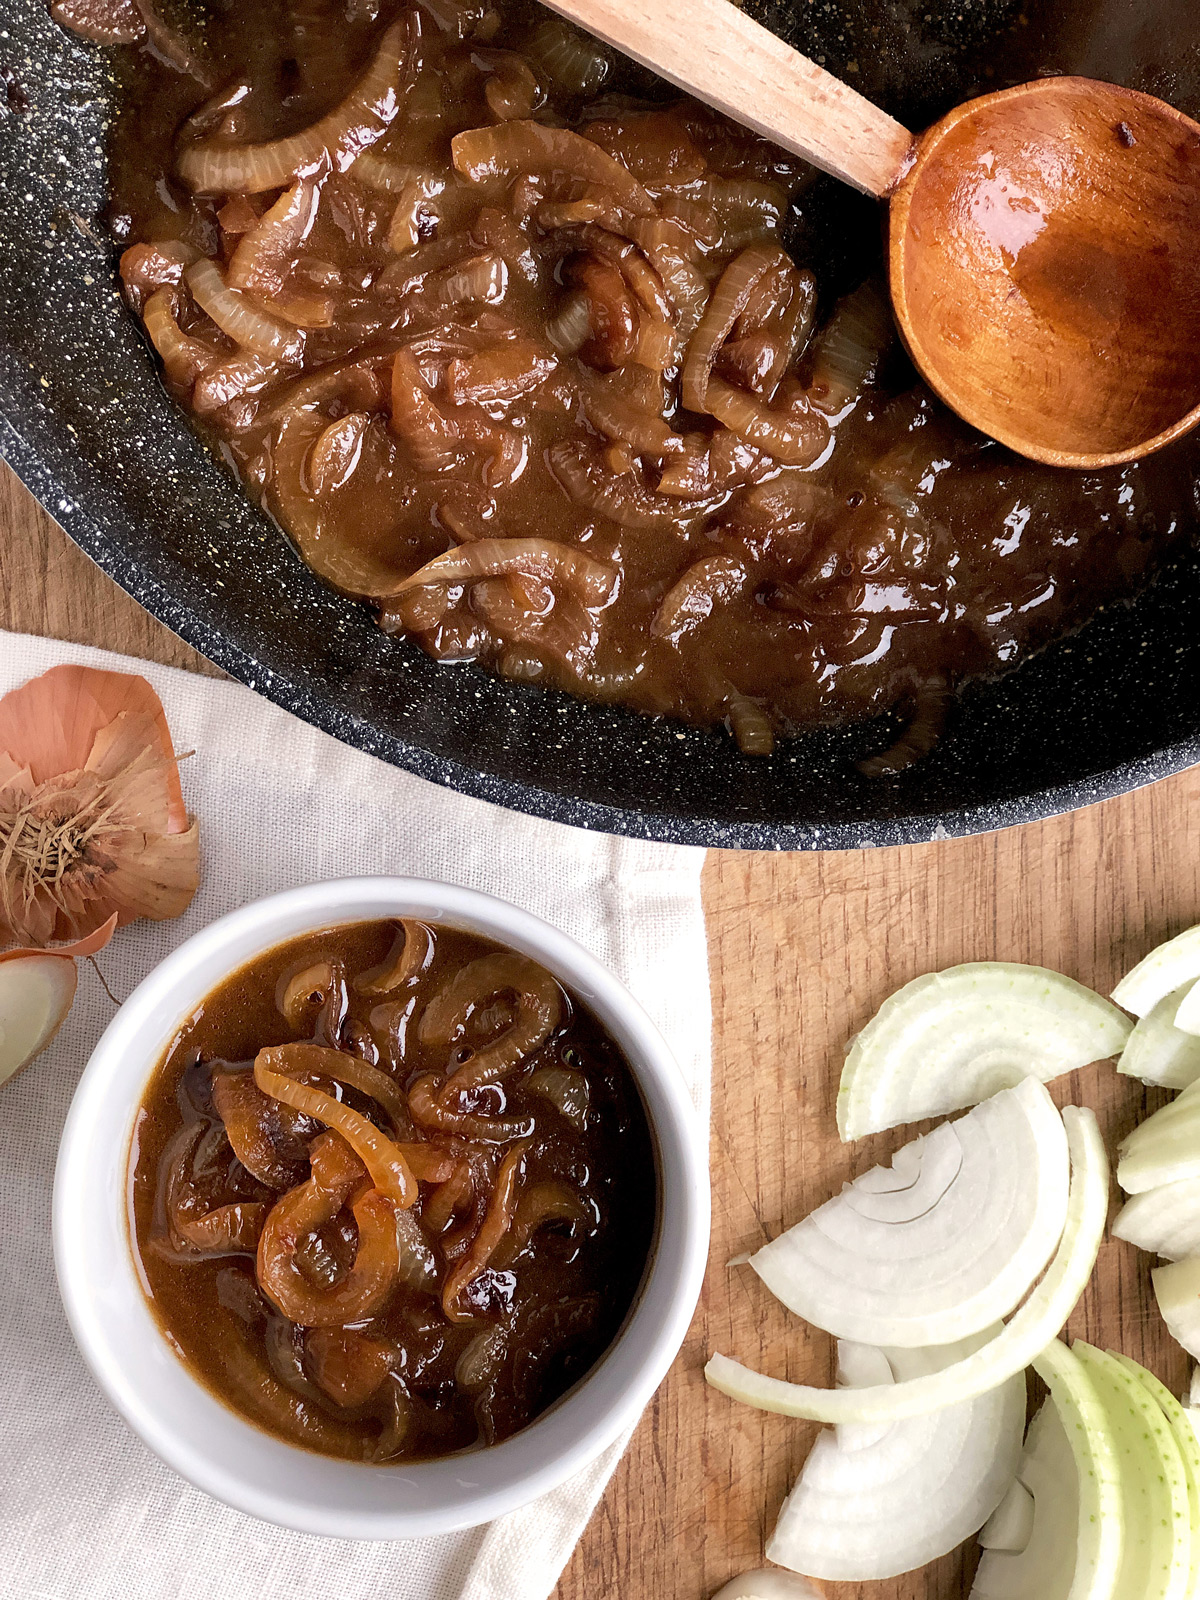 Caramelised onion gravy in a small white bowl ; sliced onion and non-stic pan with more gravy.